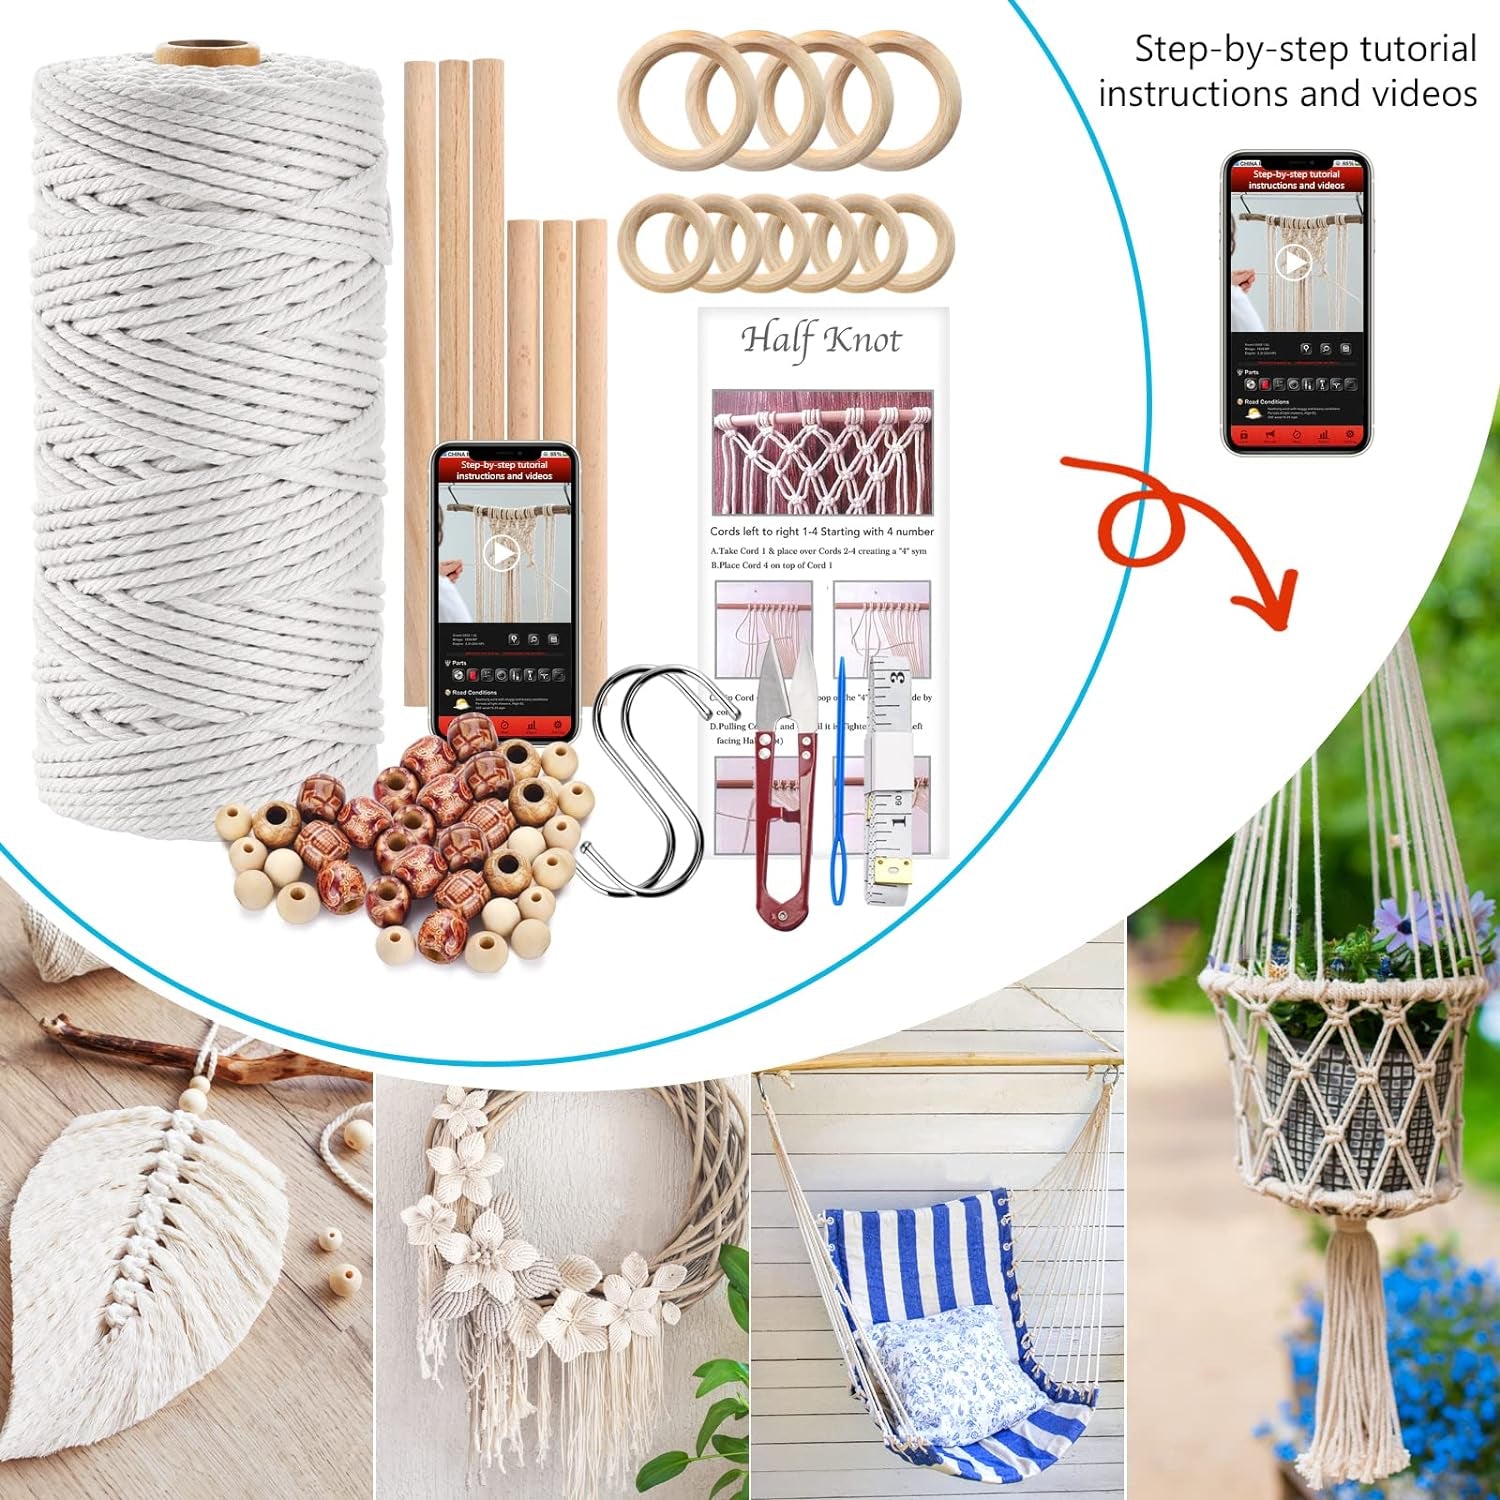 121Pcs Macrame Kit, Macrame Supplies 3Mm X 109Yards Macrame Cord for Macrame Kits for Adults Beginners, with Accessories like 100Pcs Beads and 10Pcs Wooden Rings for Macrame Plant Hanger Kit